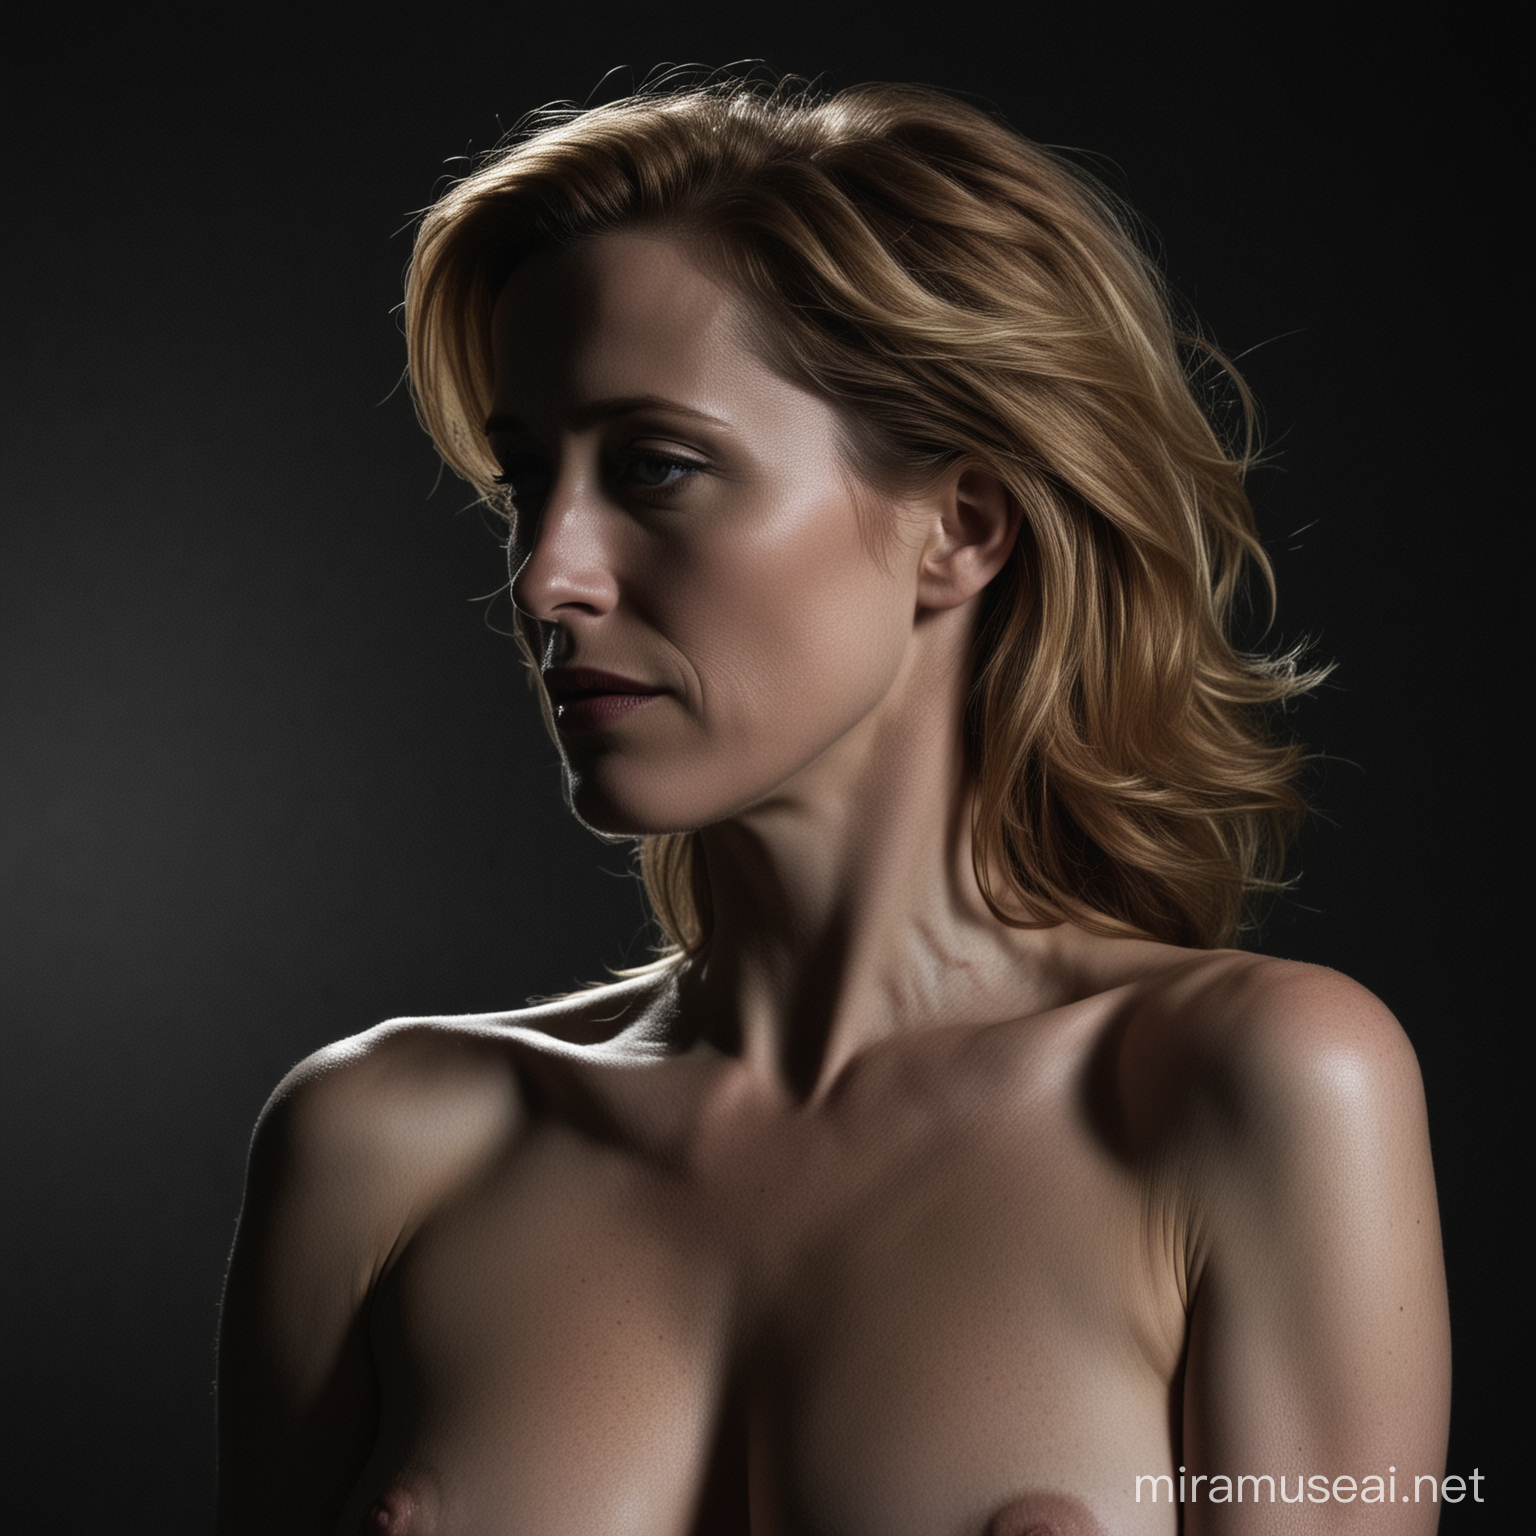 A captivating minimalist photograph of Gillian Anderson's topless silhouette, with her striking gaze lost in the vast distance. Her elegant profile is accentuated by the dark background, creating a stark contrast between her features and the surrounding darkness. 